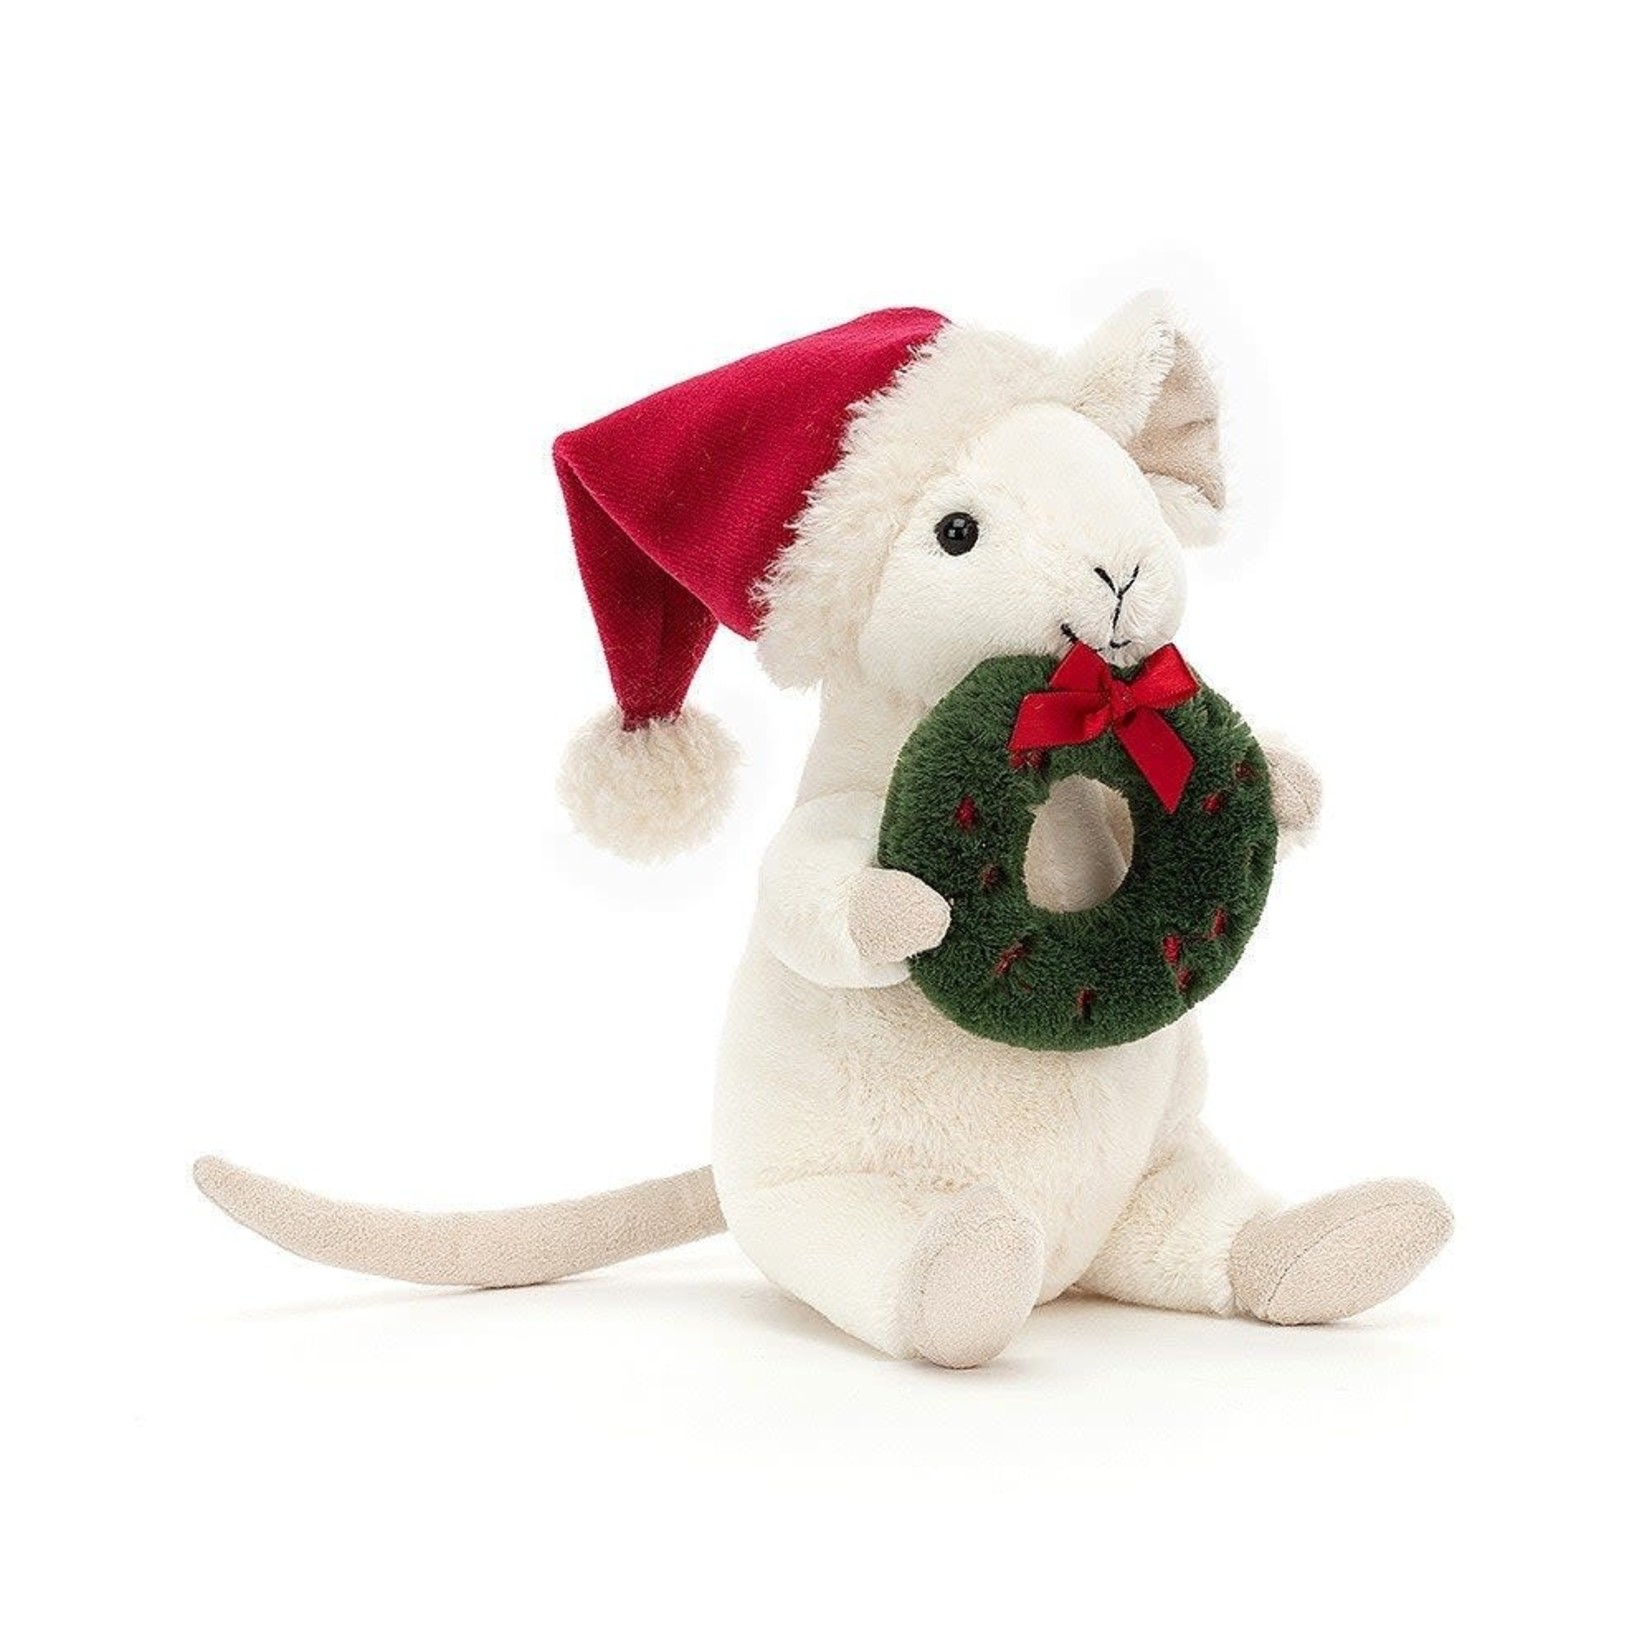 JellyCat wreath merry mouse